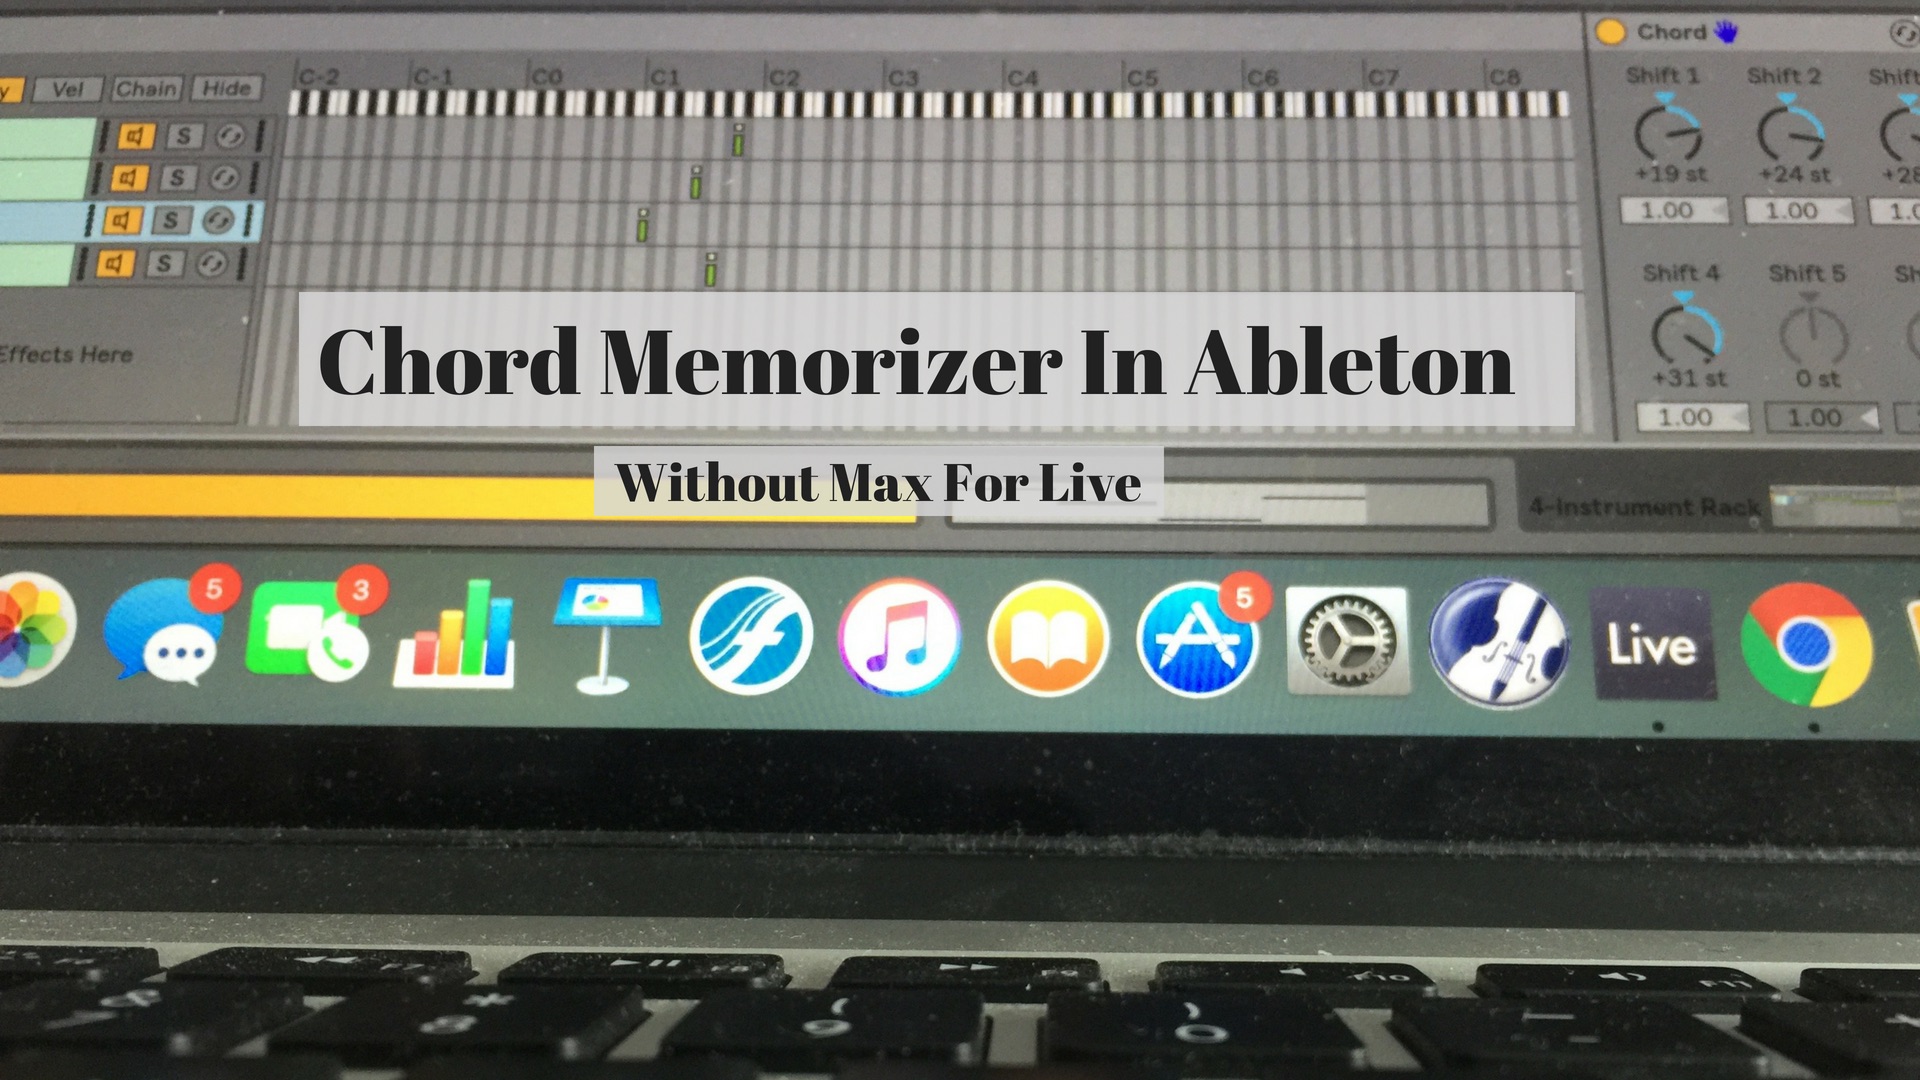 Ableton Chord Memorizer Without Max for Live